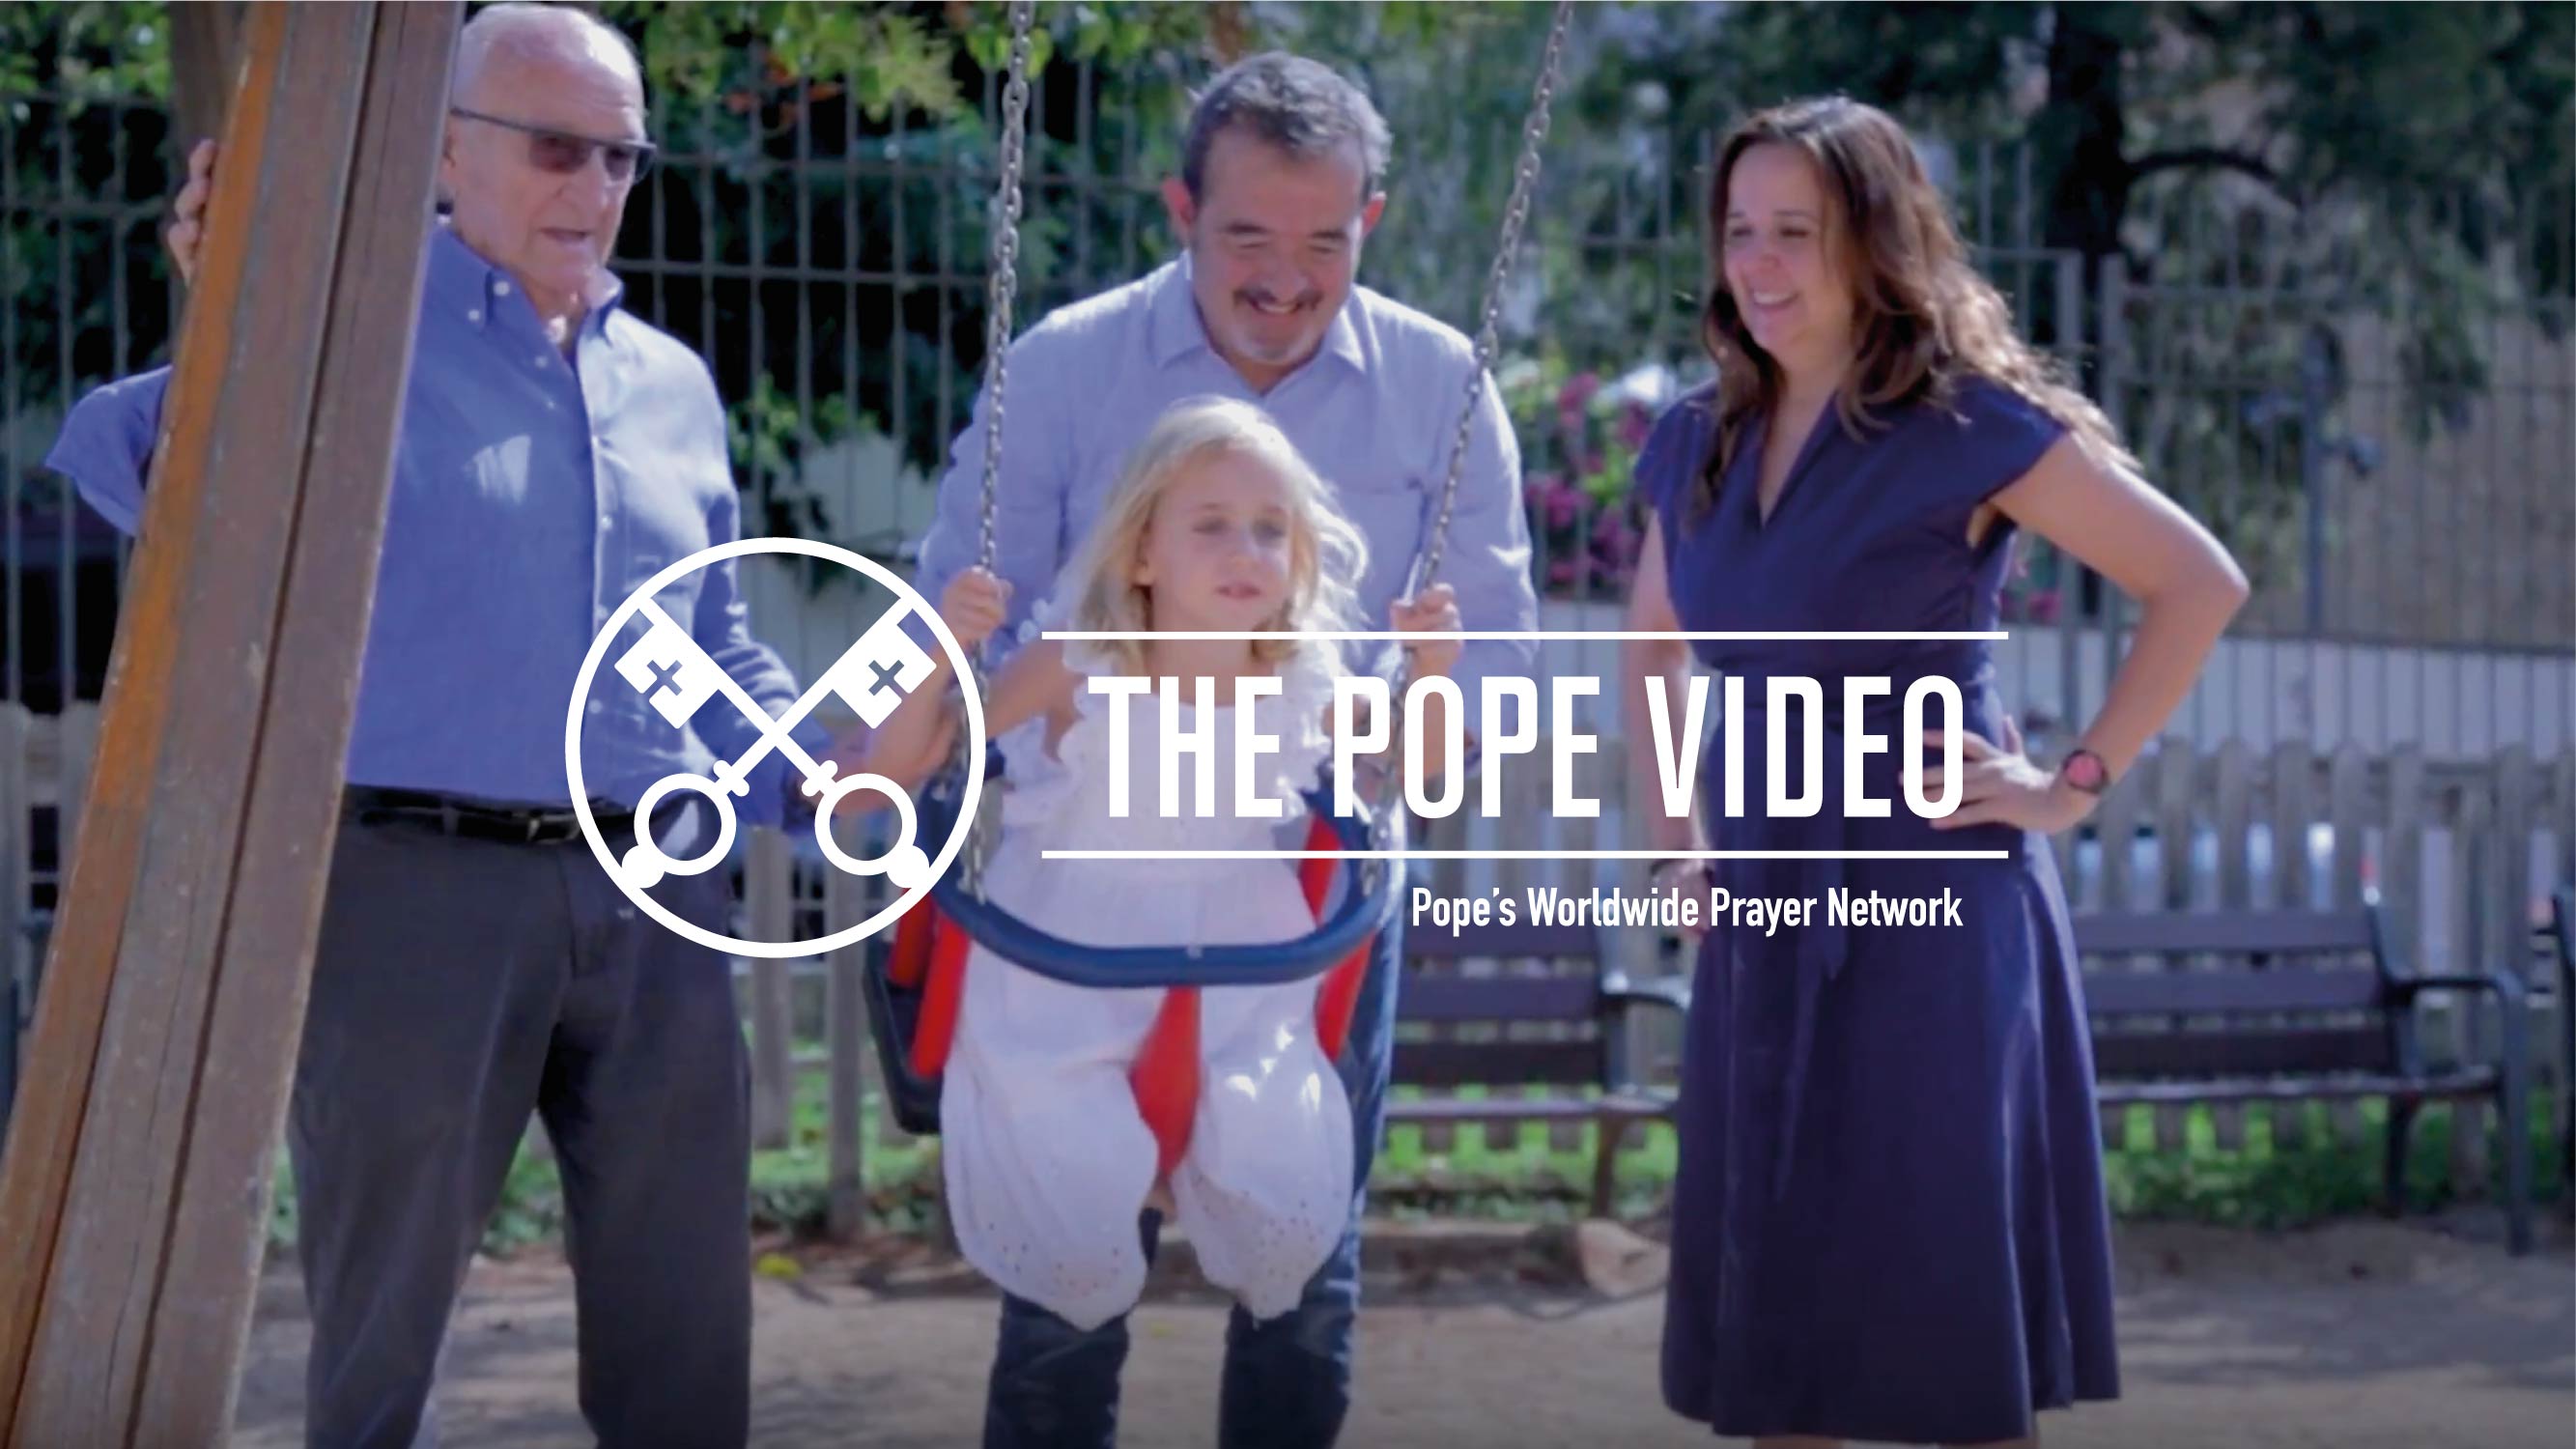 The Pope Video August 2018 (Official Image)